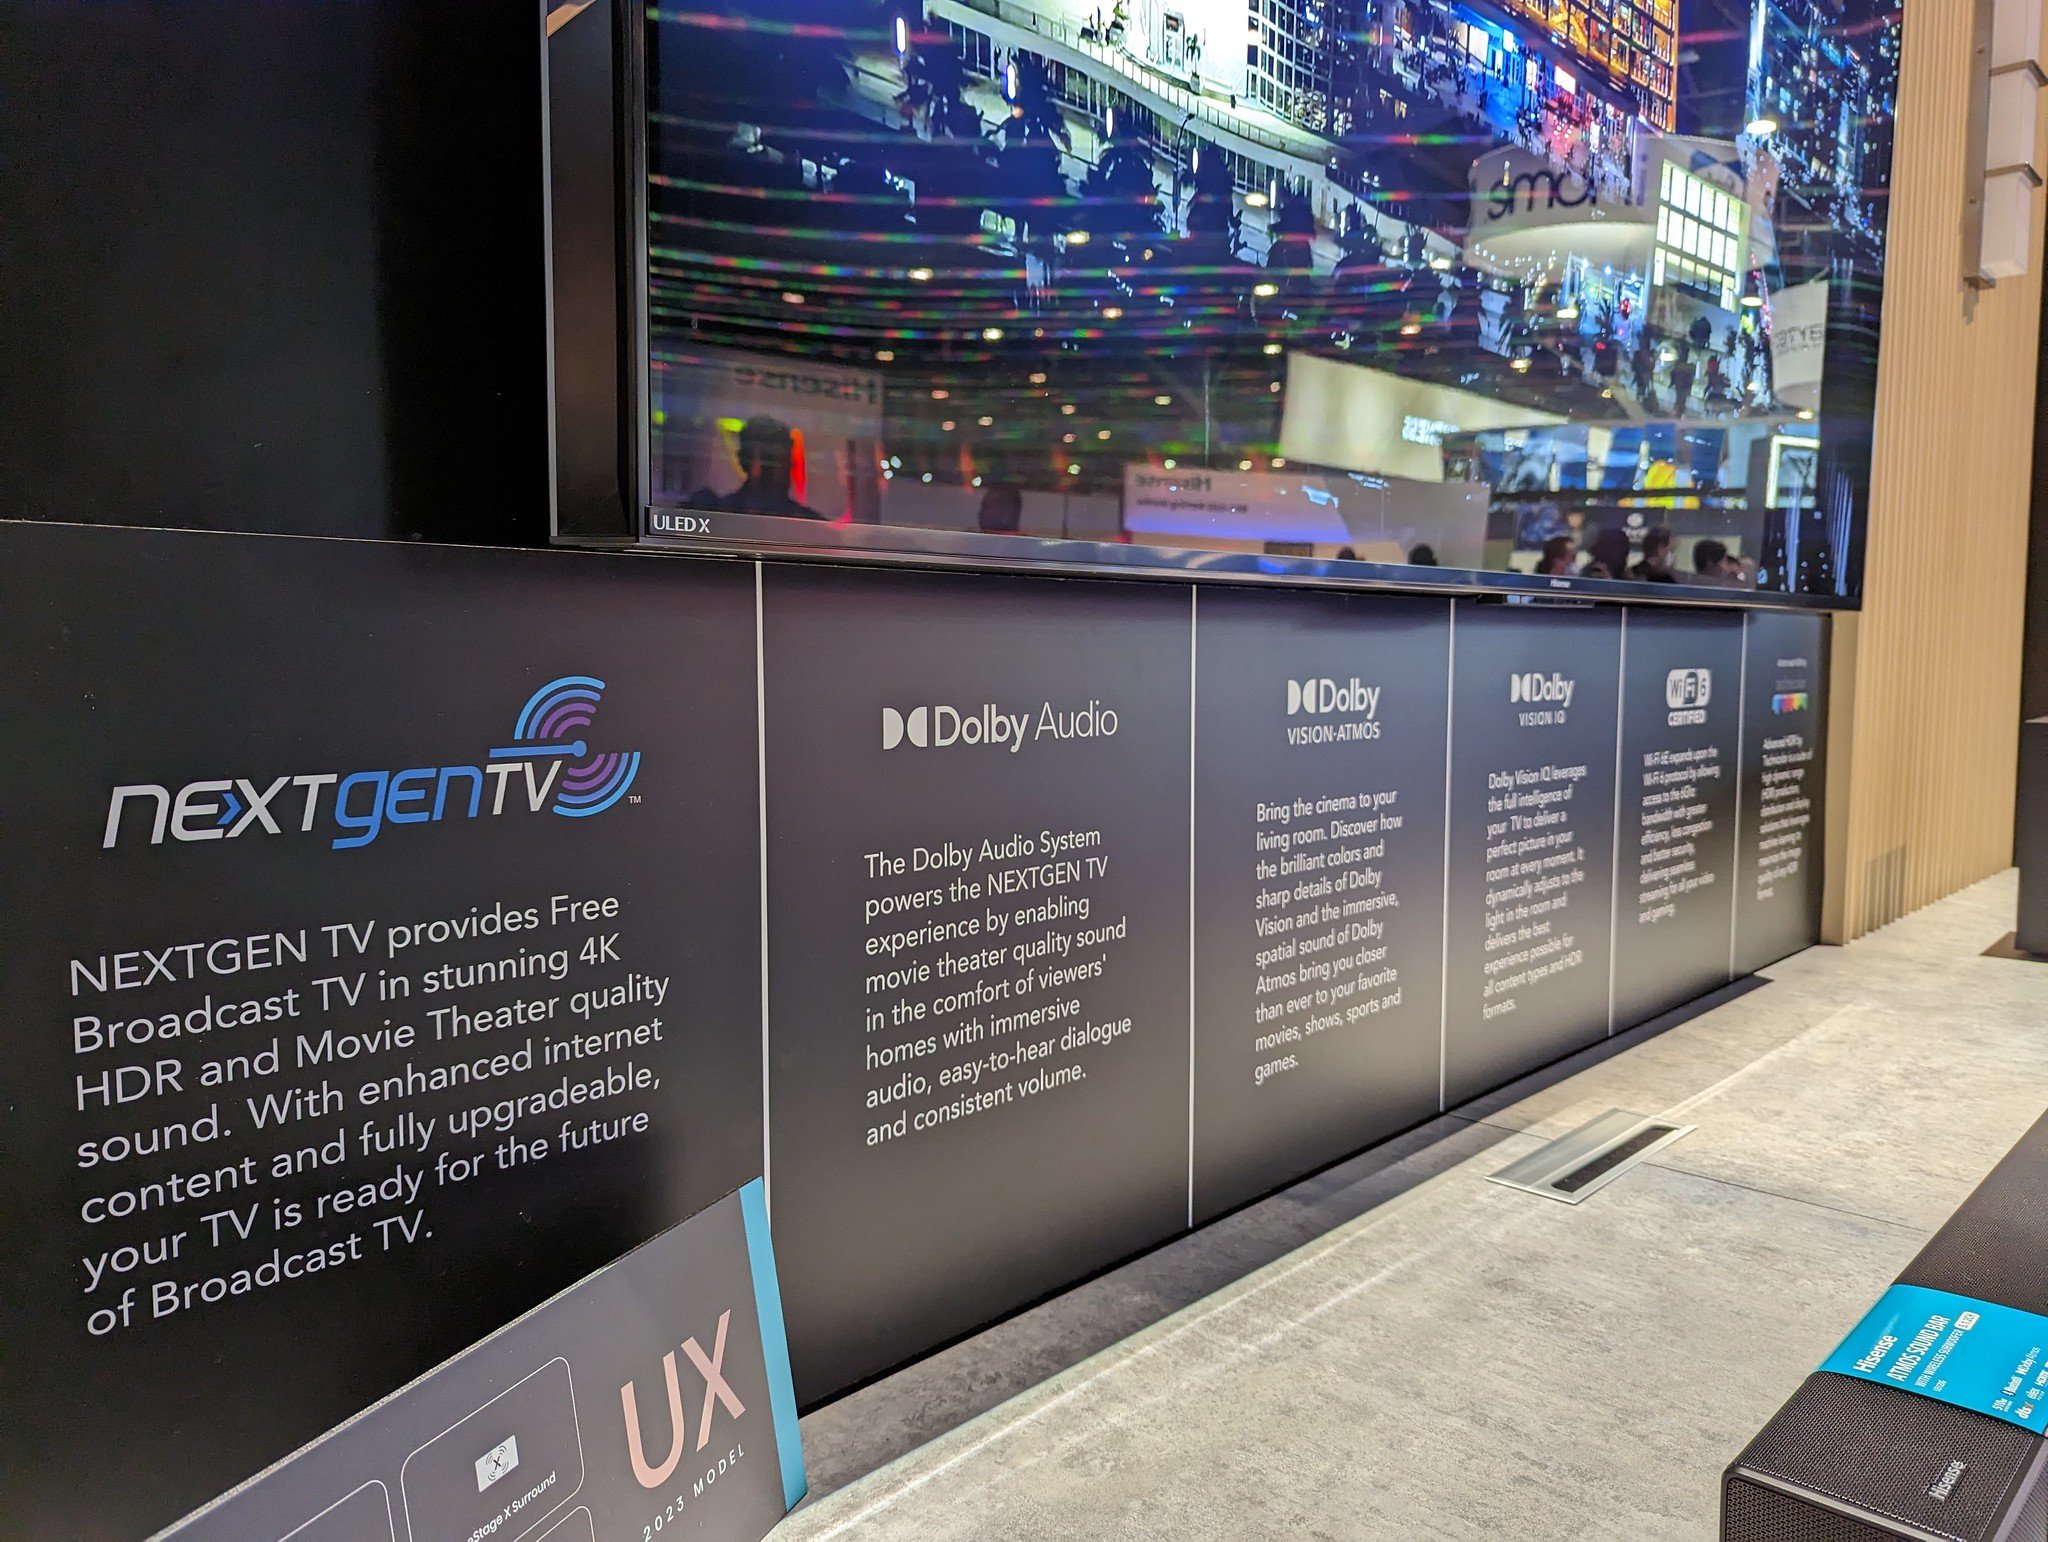 A display at Hisenses CES 2023 exhibit lists NEXTGEN TV as a technology featured on its new sets